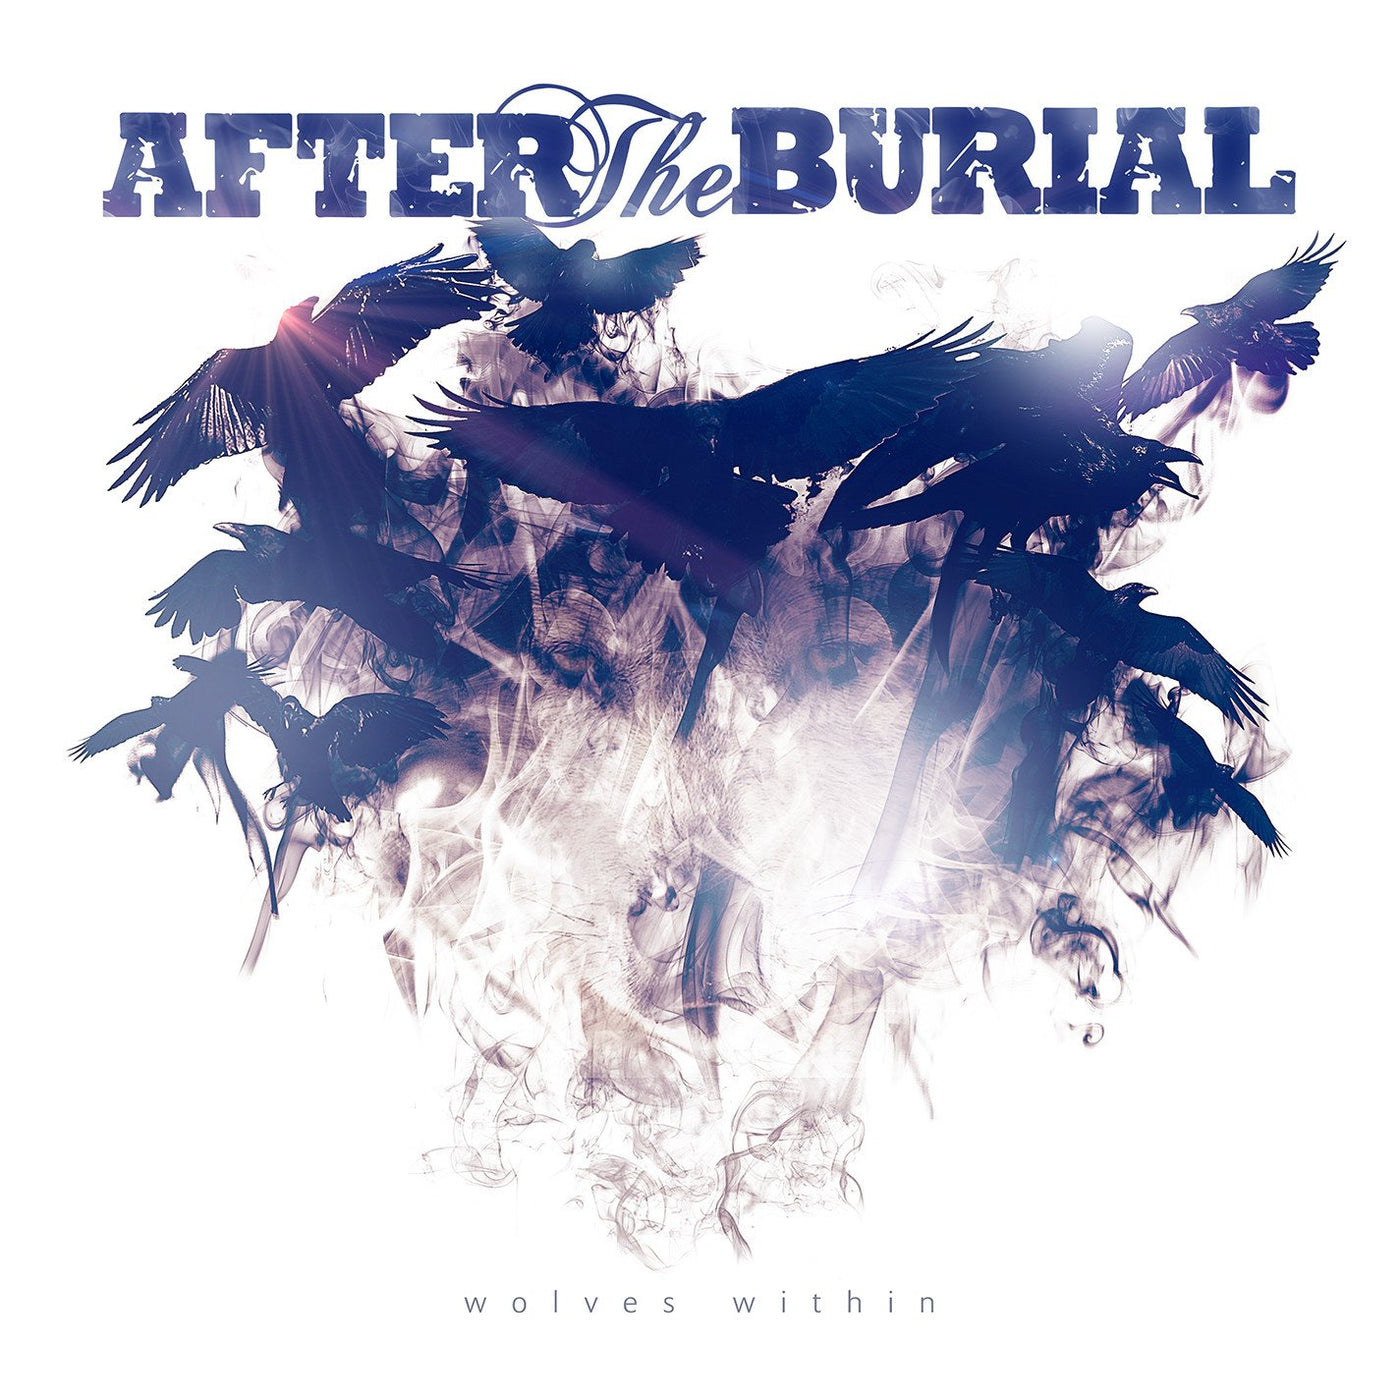 After The Burial - 'Wolves Within' CD